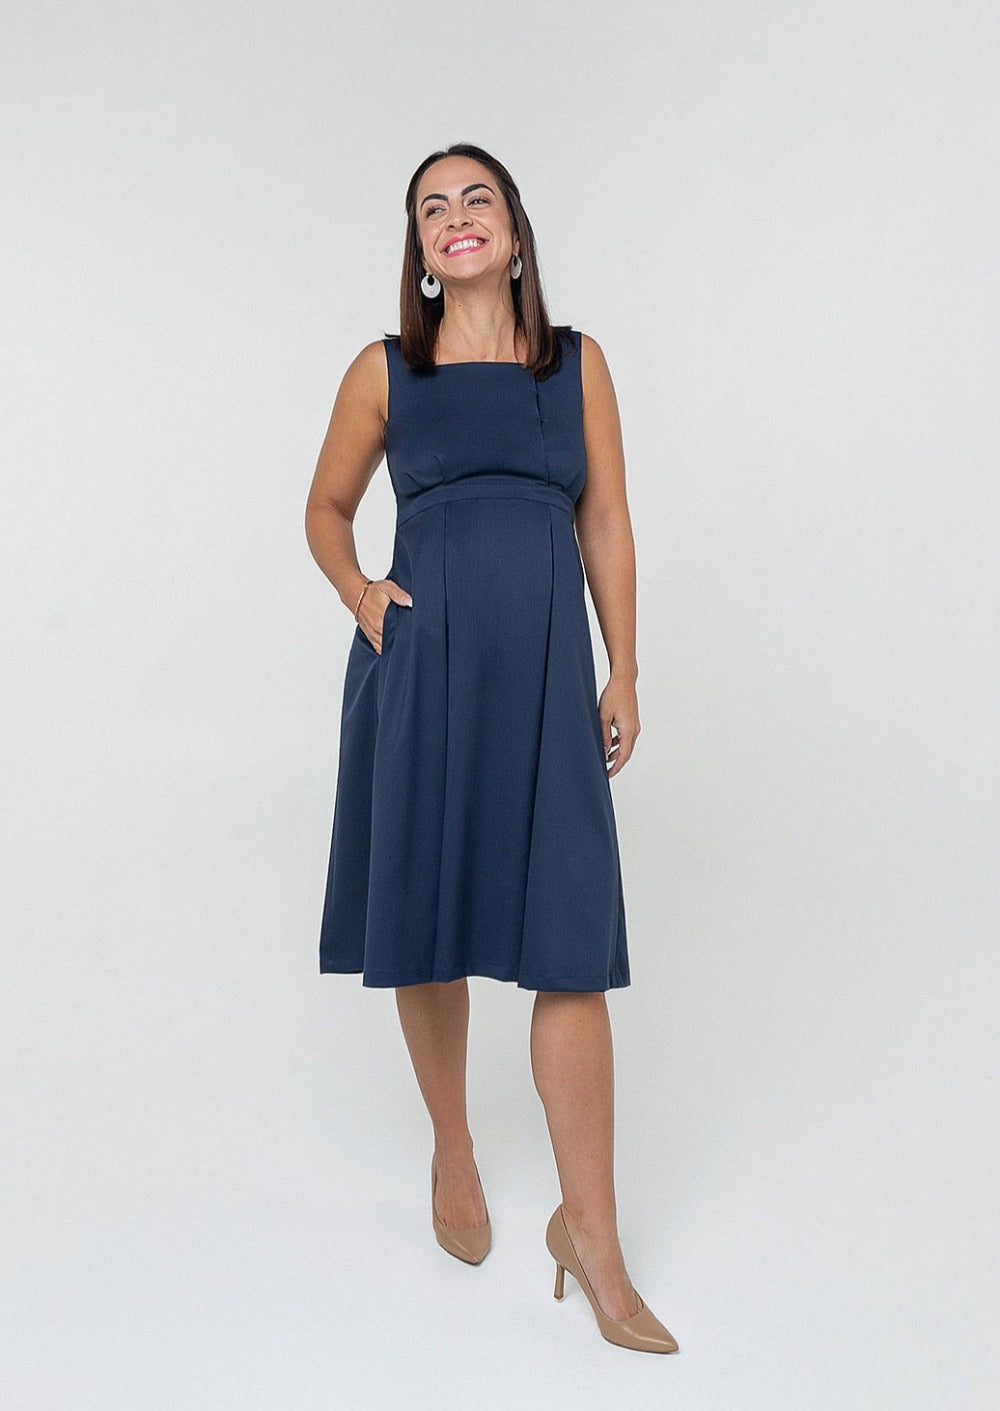 The Best Petite Maternity Clothes